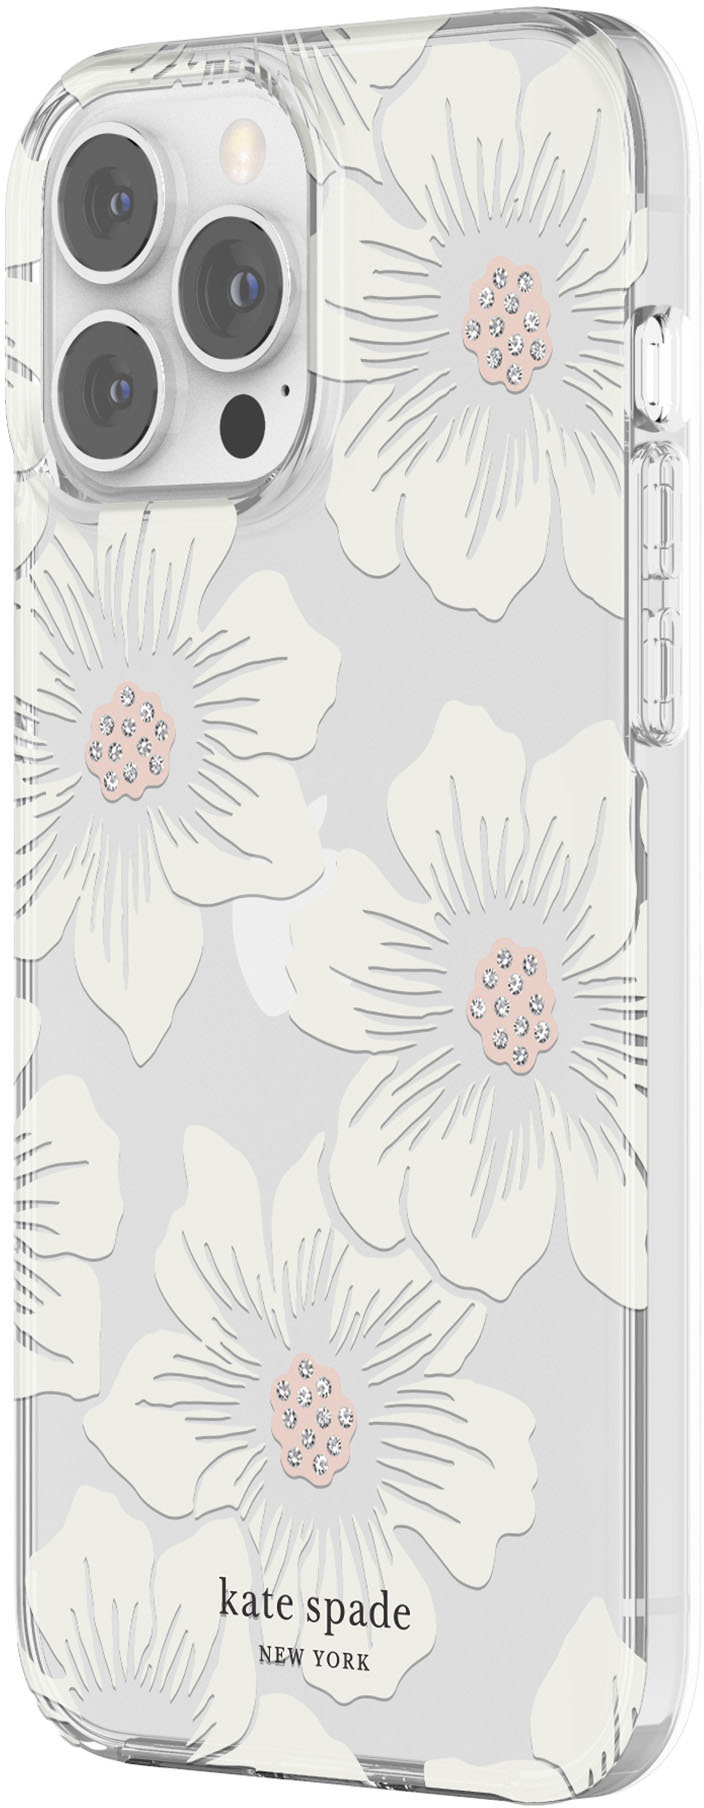 Angle View: kate spade new york - Protective Hardshell Case for iPhone 13/12 Pro Max - Hollyhock